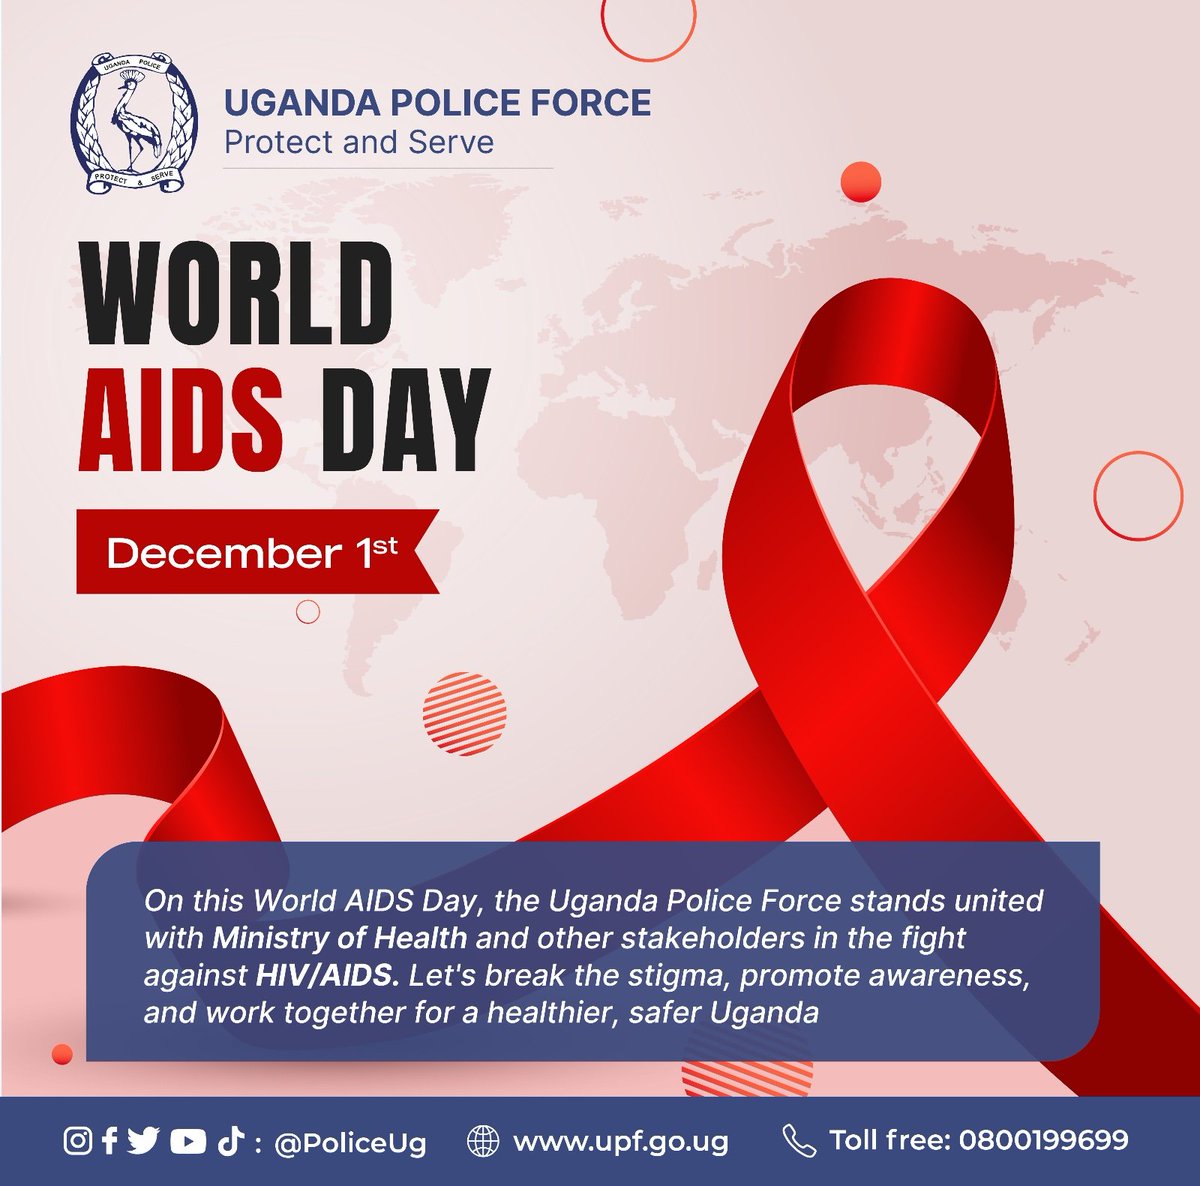 On this #WorldAIDSDay, the Uganda Police Force stands united with @MinofHealthUG and other stakeholders in the fight against #HIV/AIDS. Let's break the stigma, promote awareness, and work together for a healthier, safer Uganda.